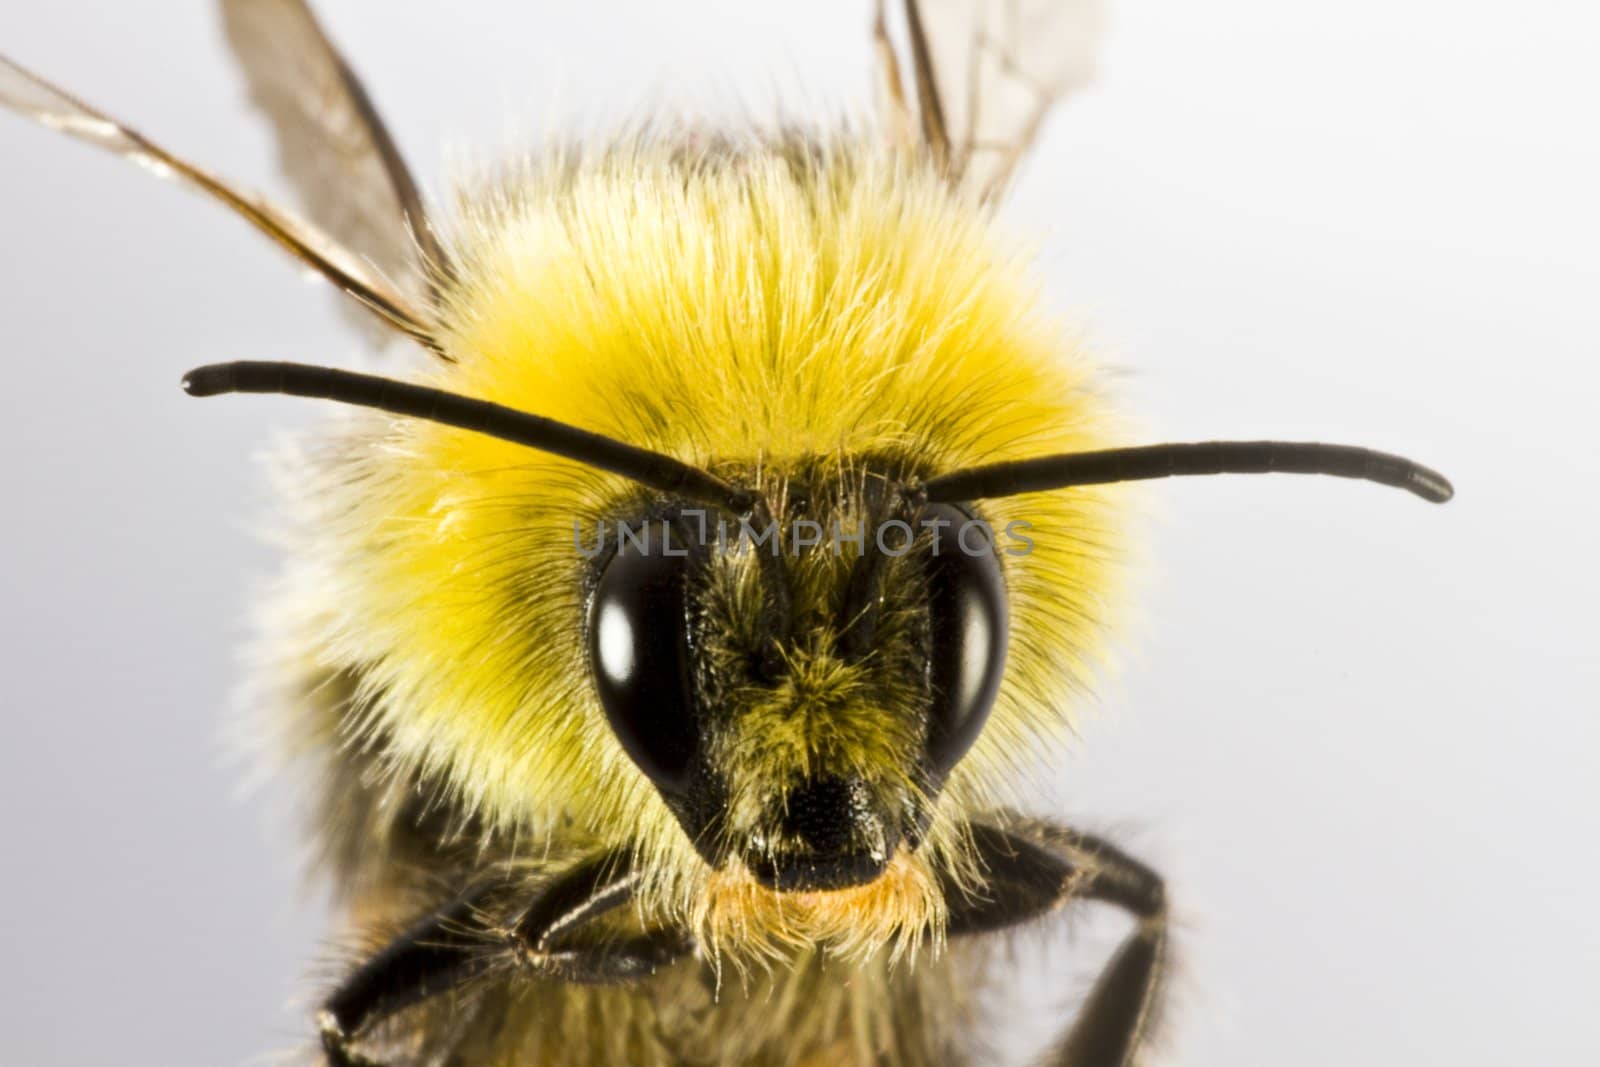 bumblebee in close up on light background